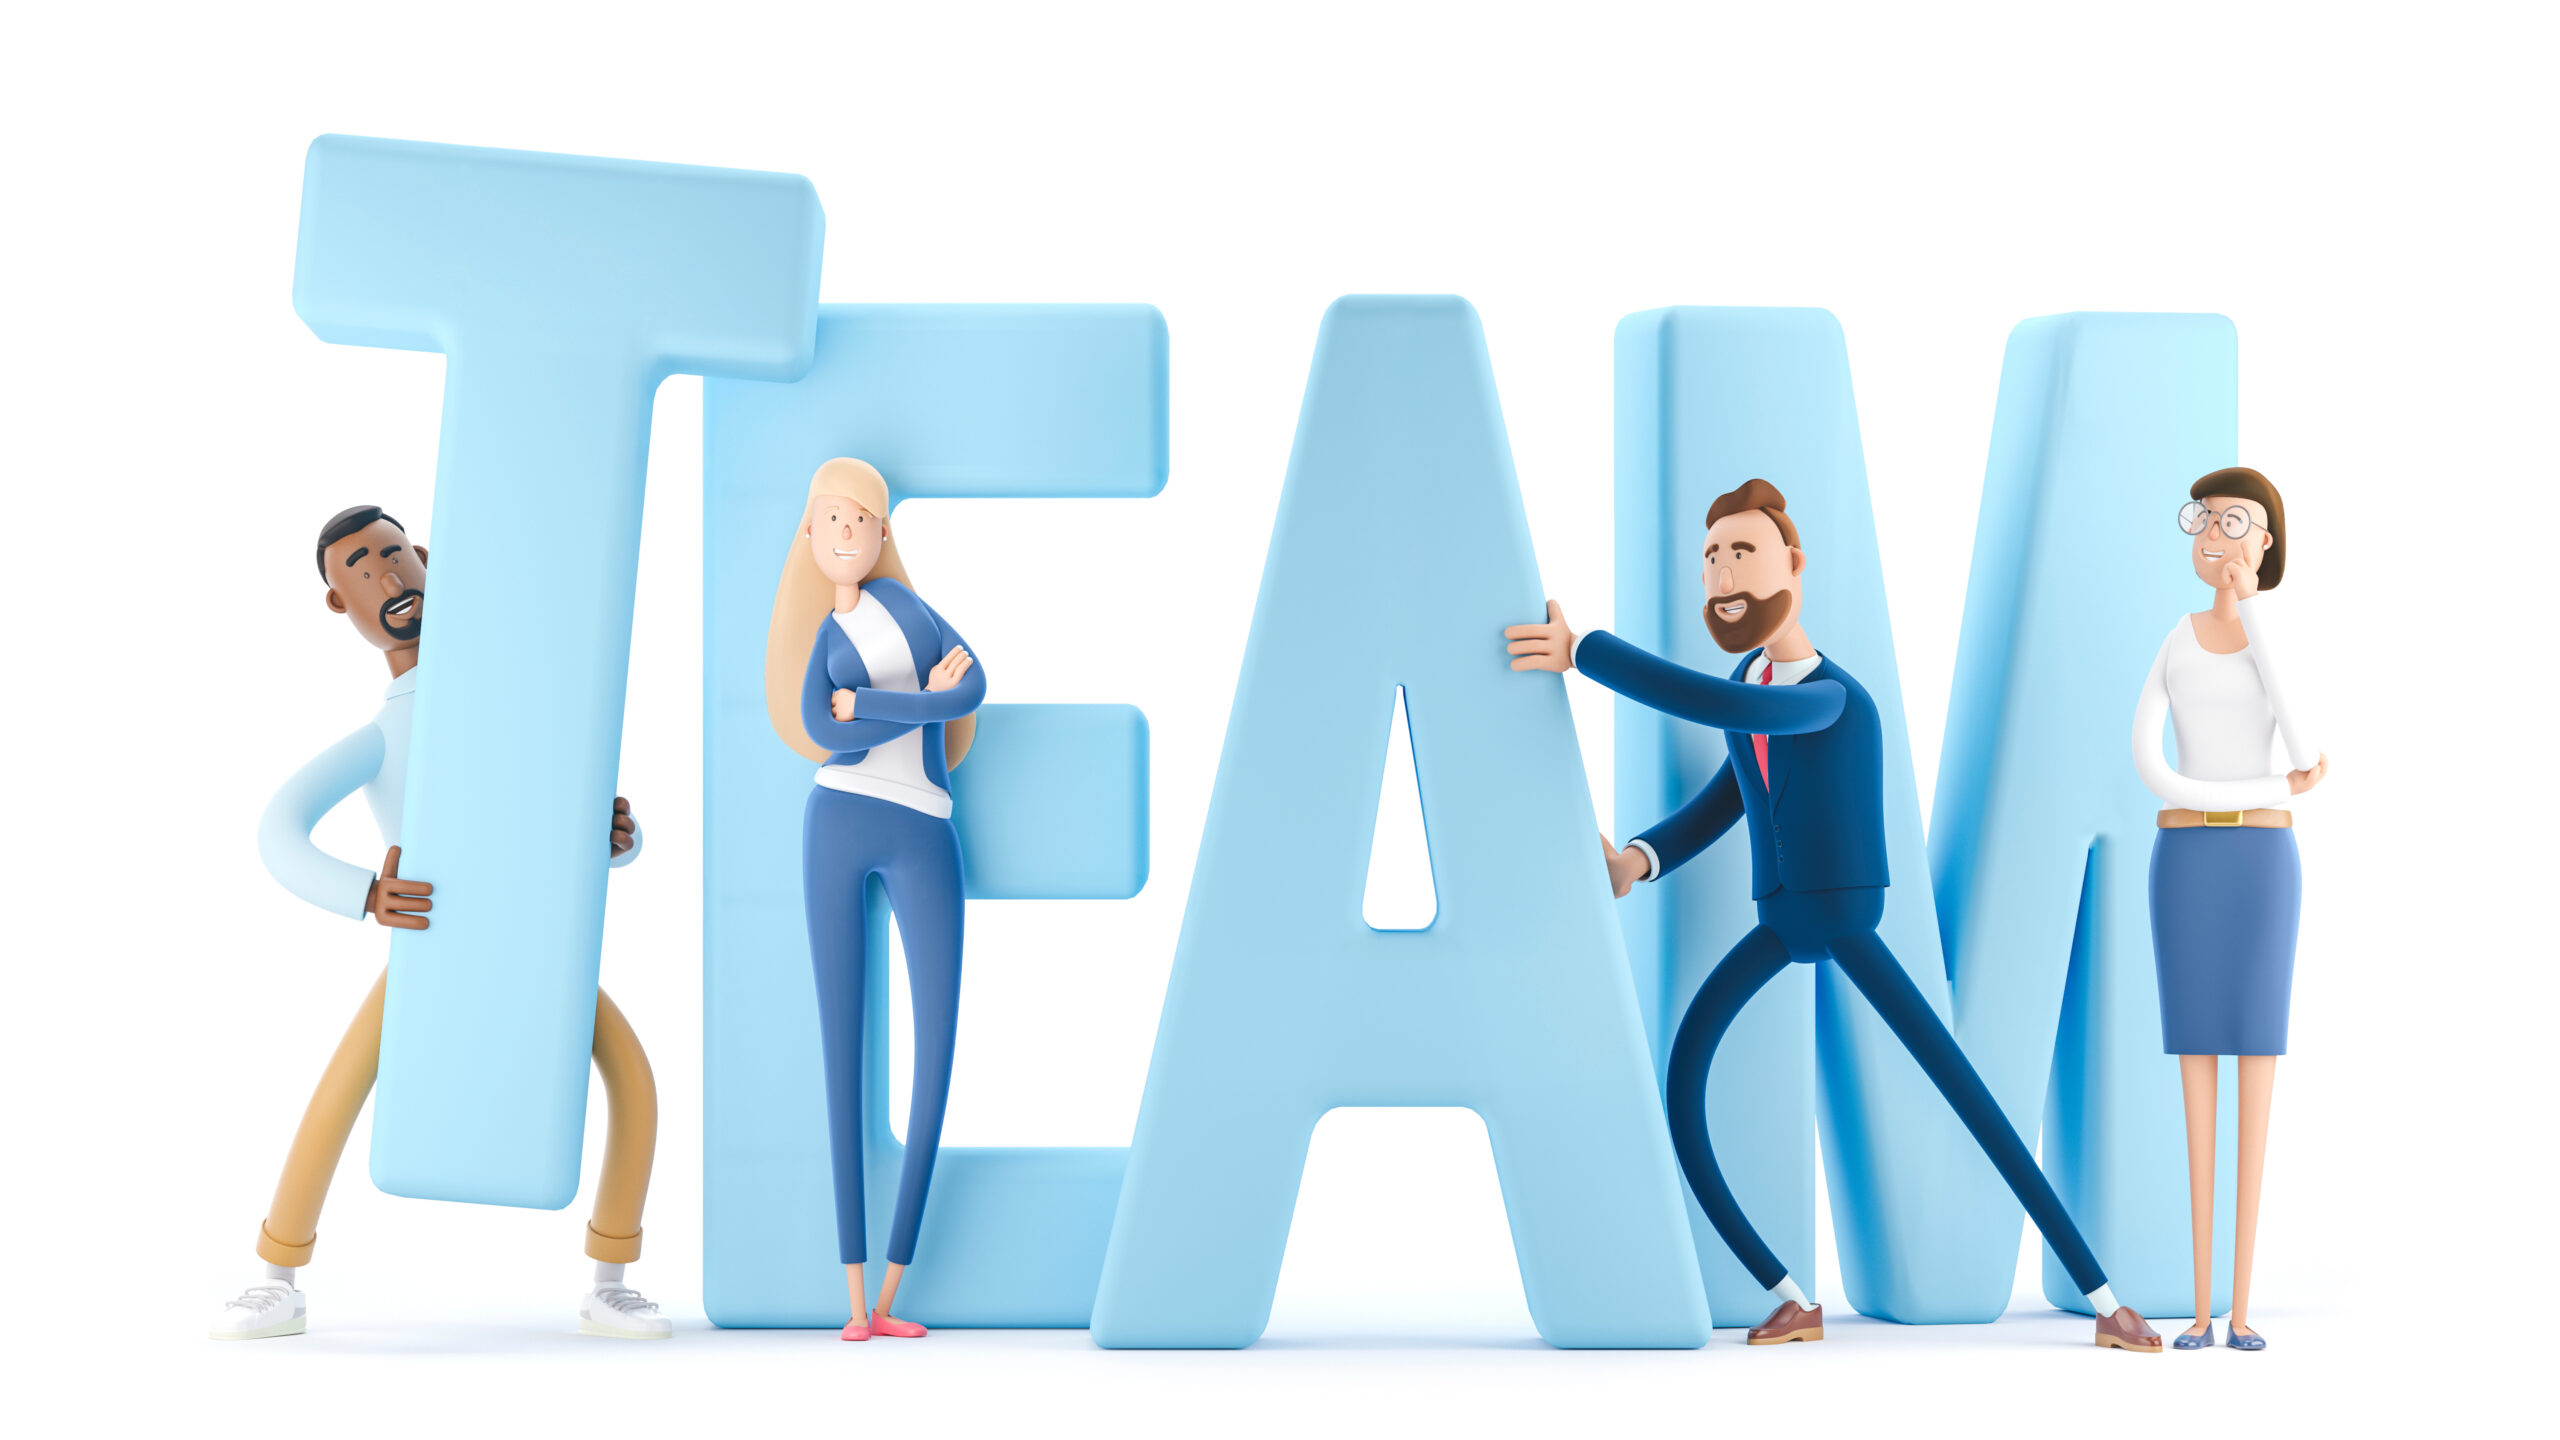 Cartoon of 2 men and 2 women constructing the word "TEAM" (each letter is bigger than each person)